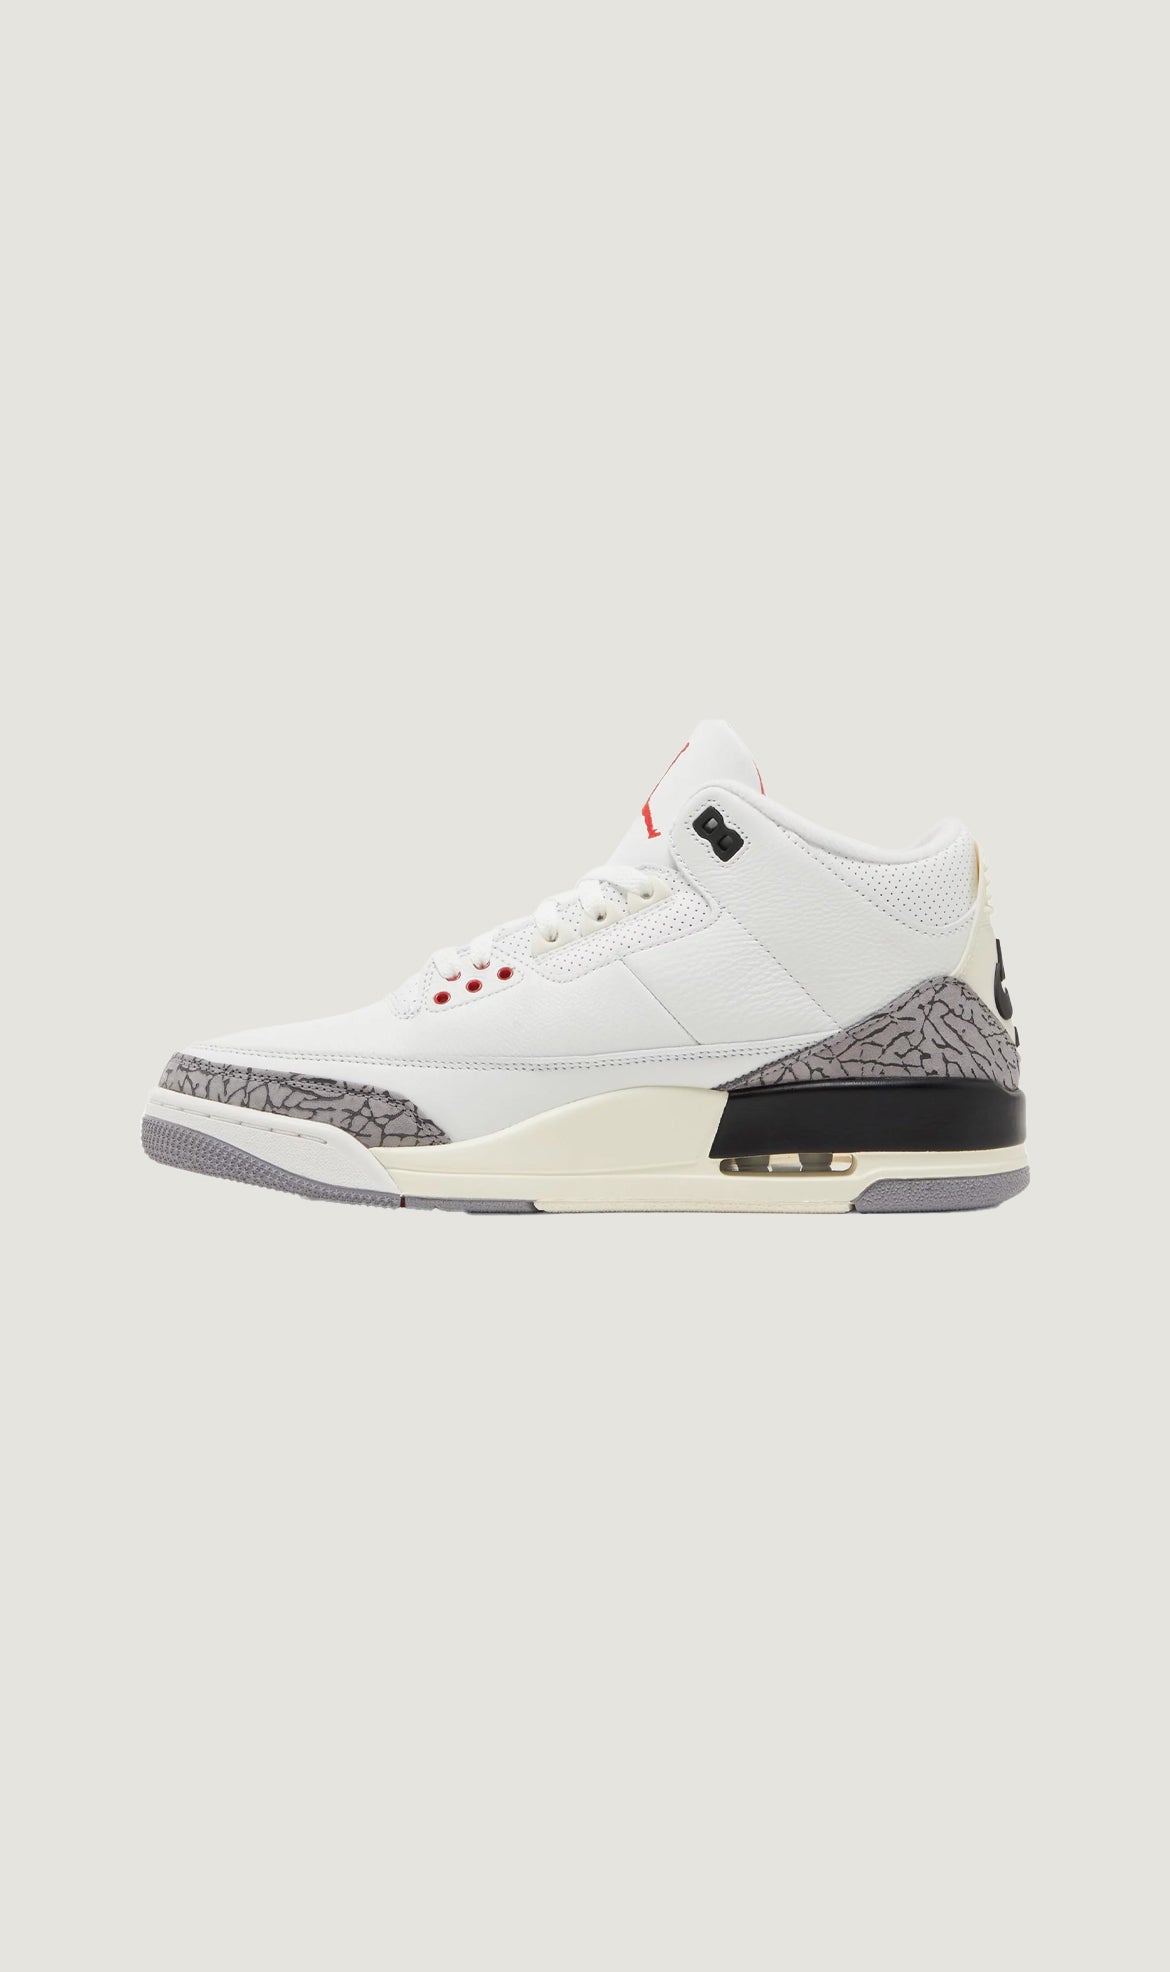 Load image into Gallery viewer, AIR JORDAN 3 RETRO - WHITE CEMENT
